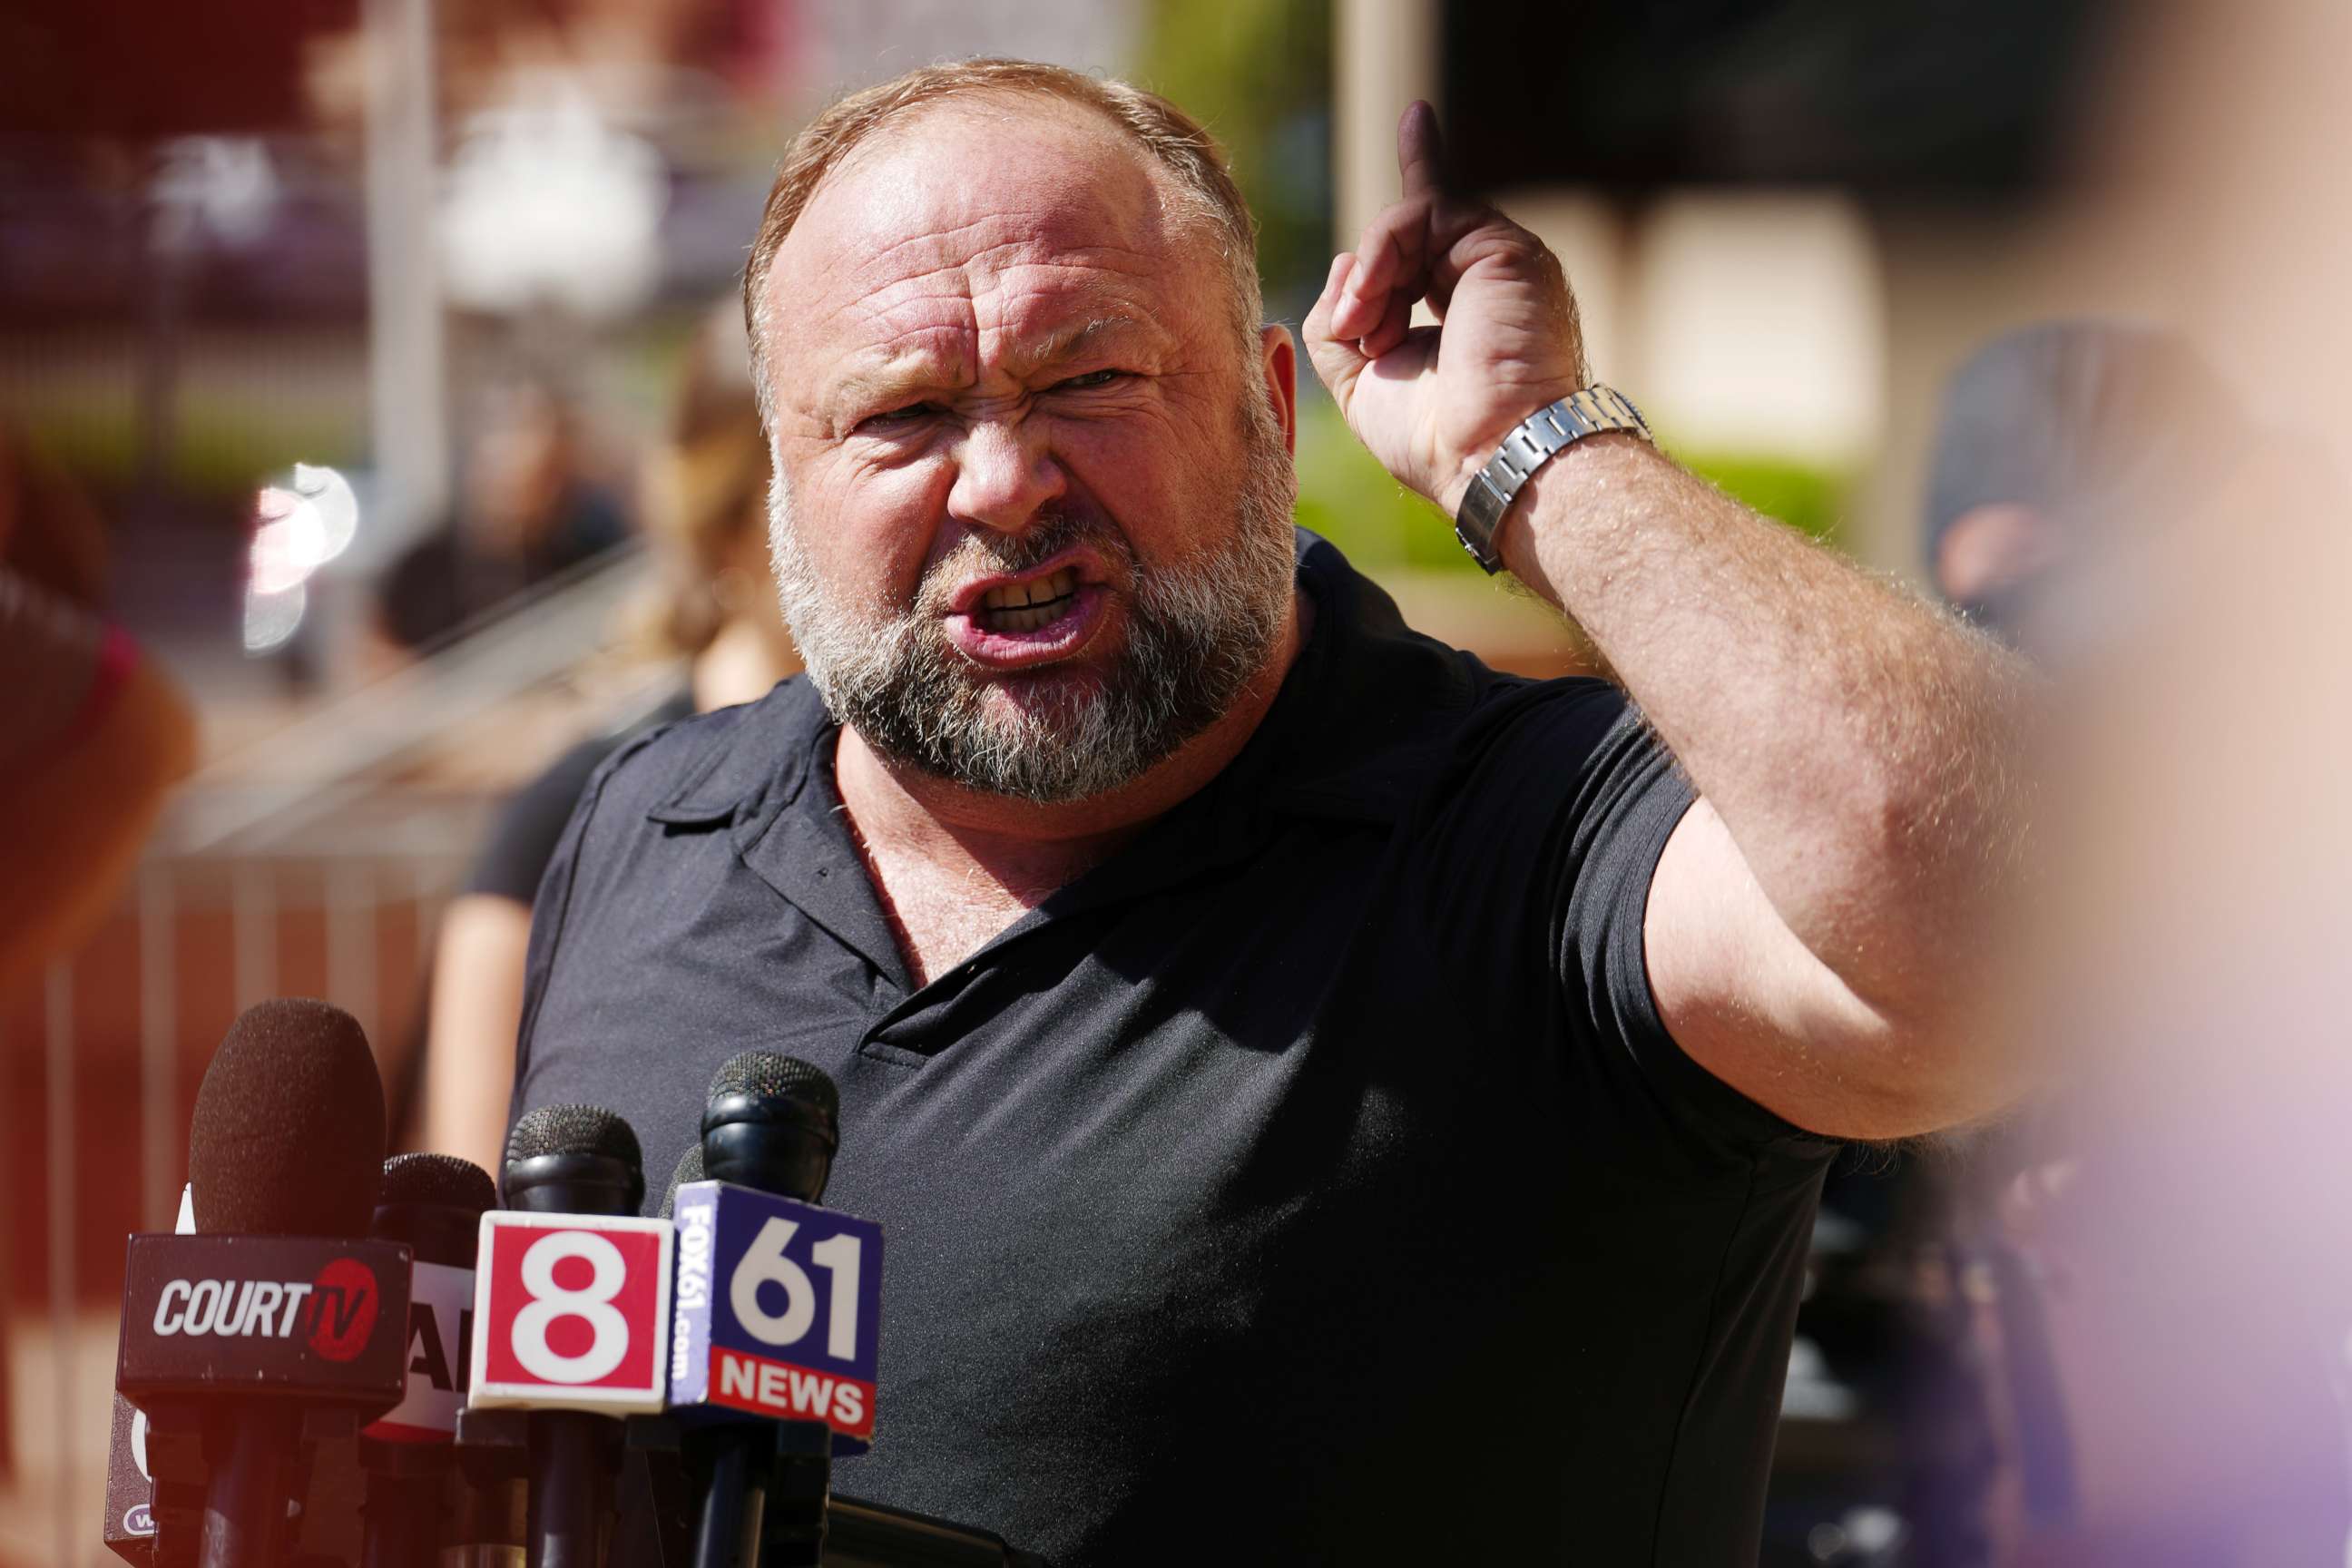 PHOTO: InfoWars founder Alex Jones speaks to the media outside Waterbury Superior Court during his trial on September 21, 2022 in Waterbury, Connecticut.